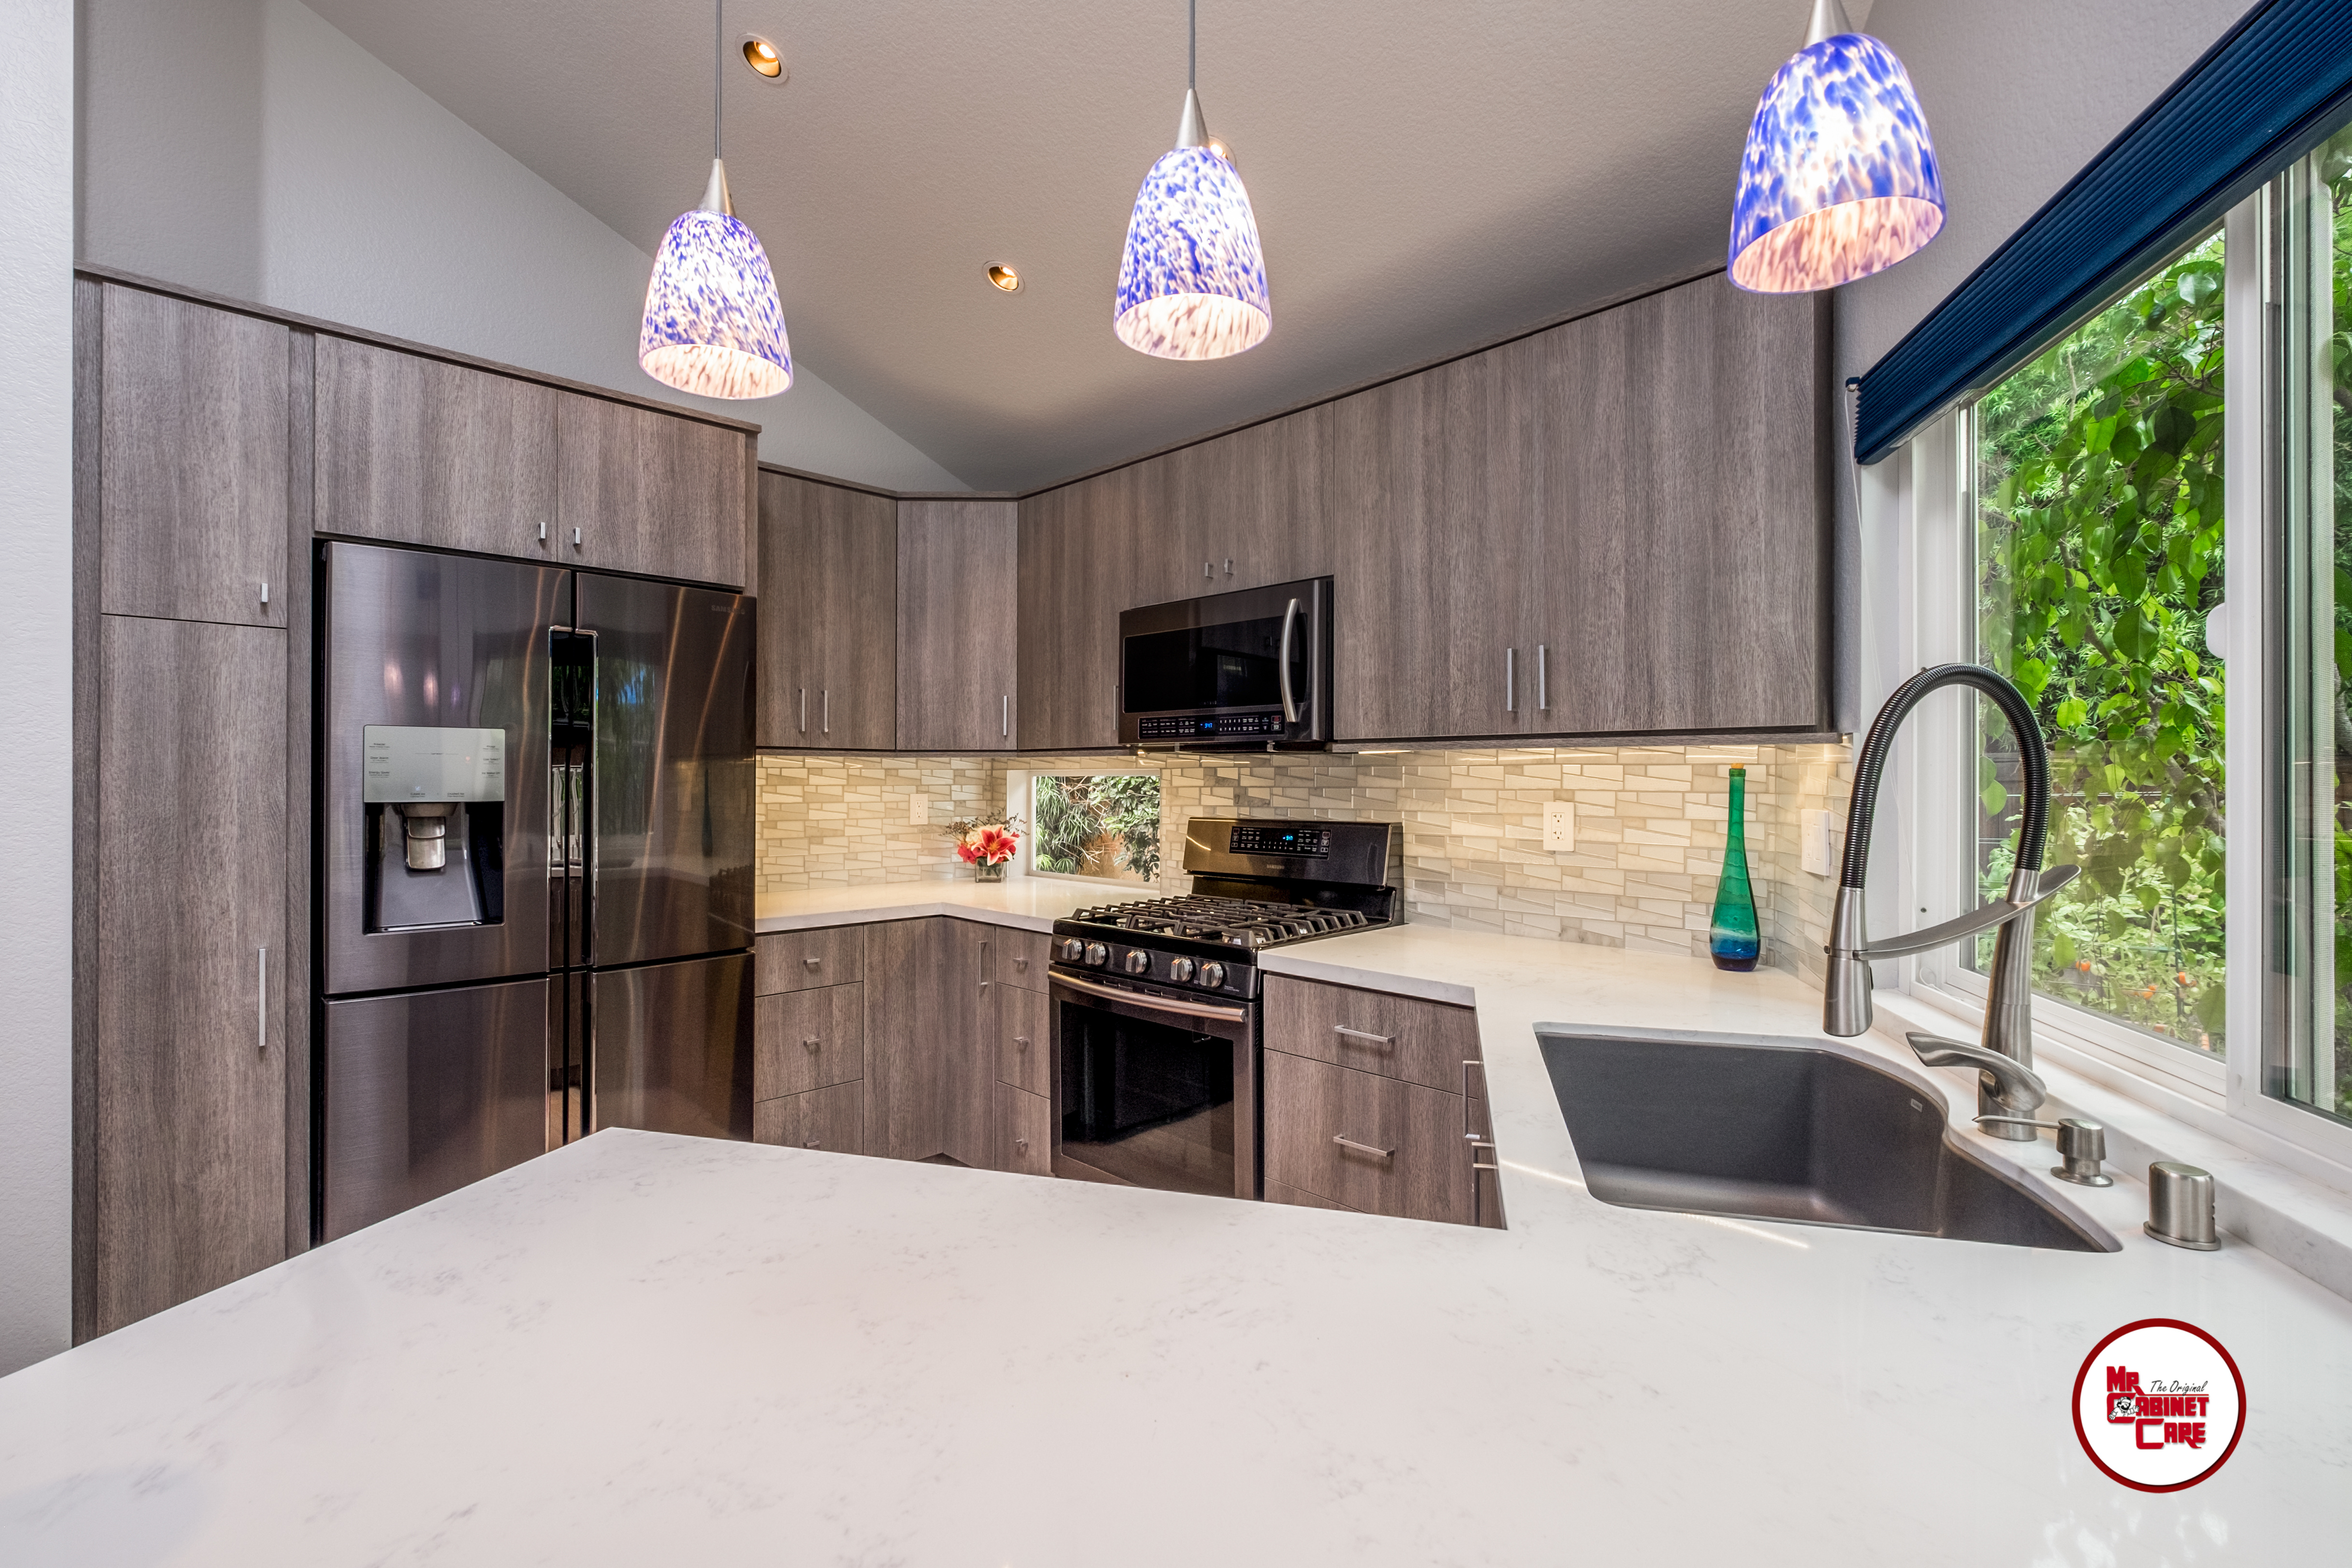 Kitchen Remodeling Services in Costa Mesa